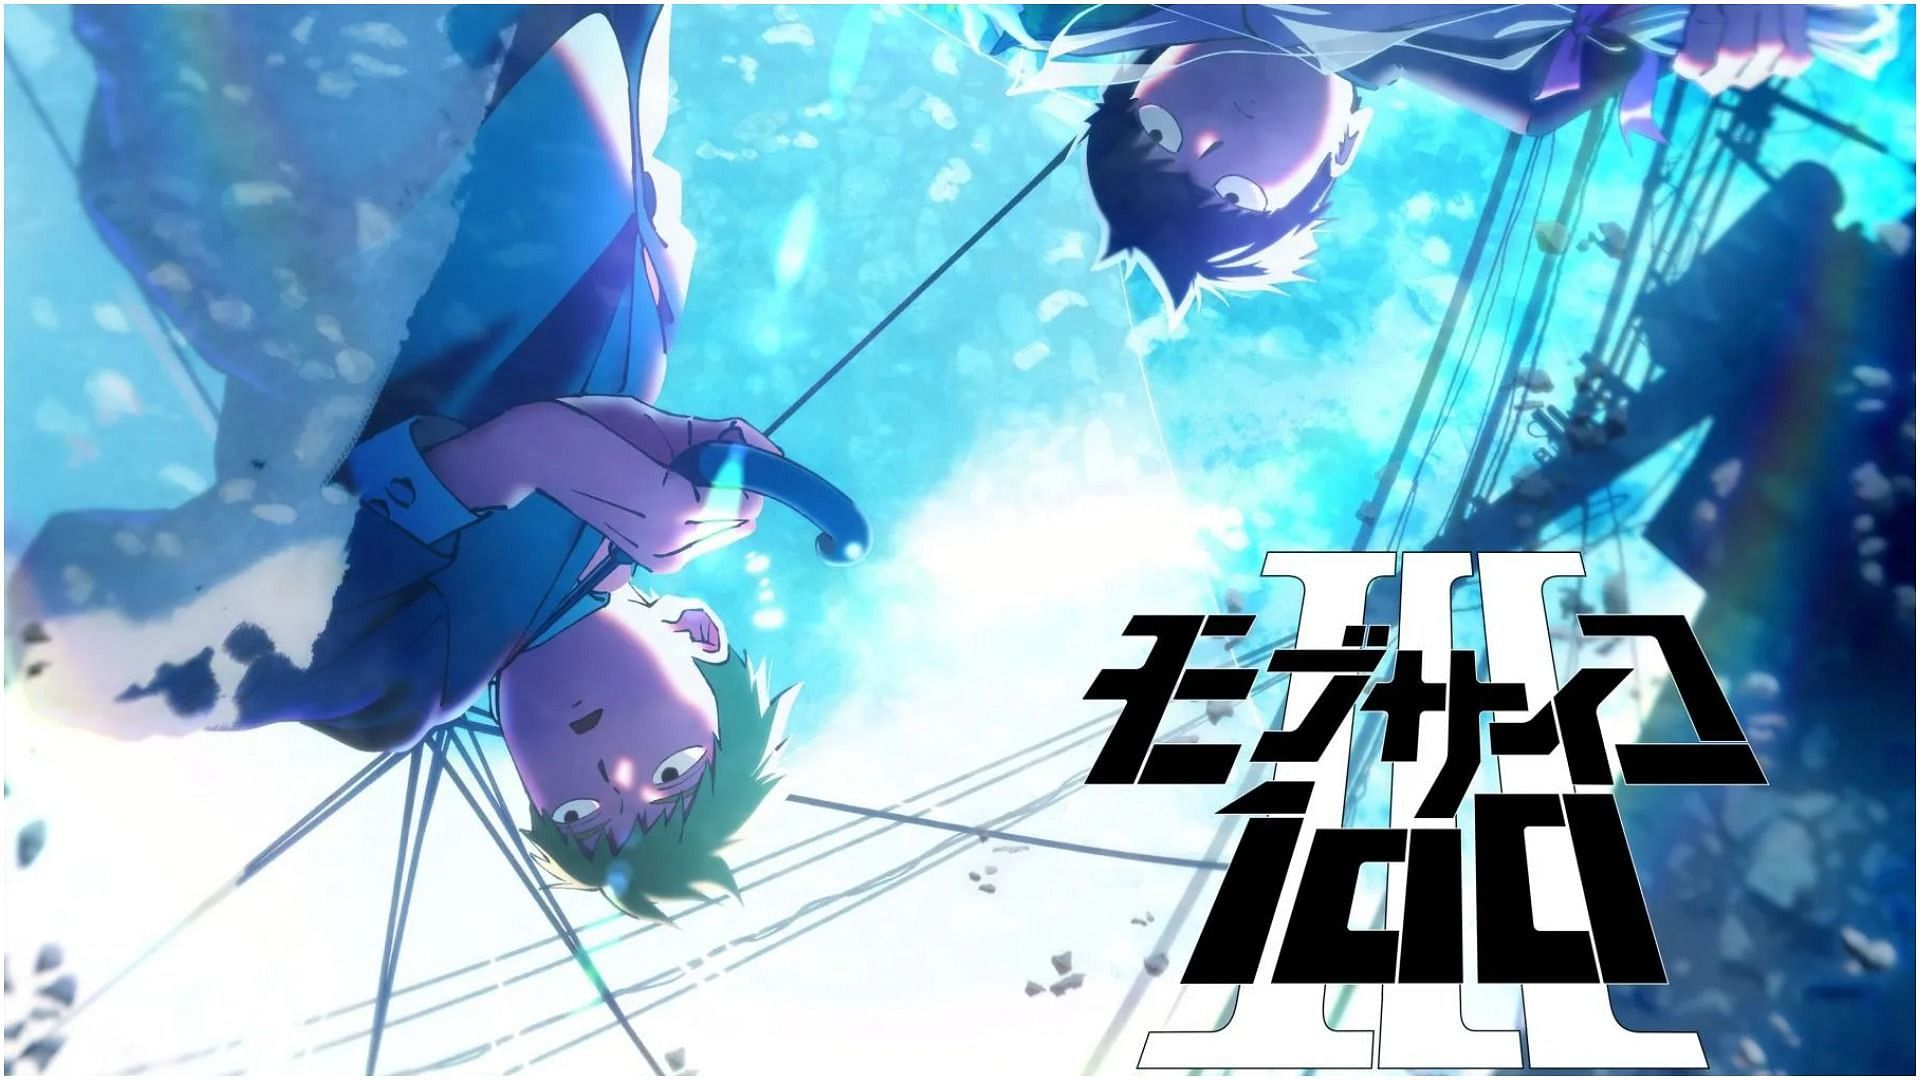 Mob Psycho 100 Season 3 official trailer reveals release date and more